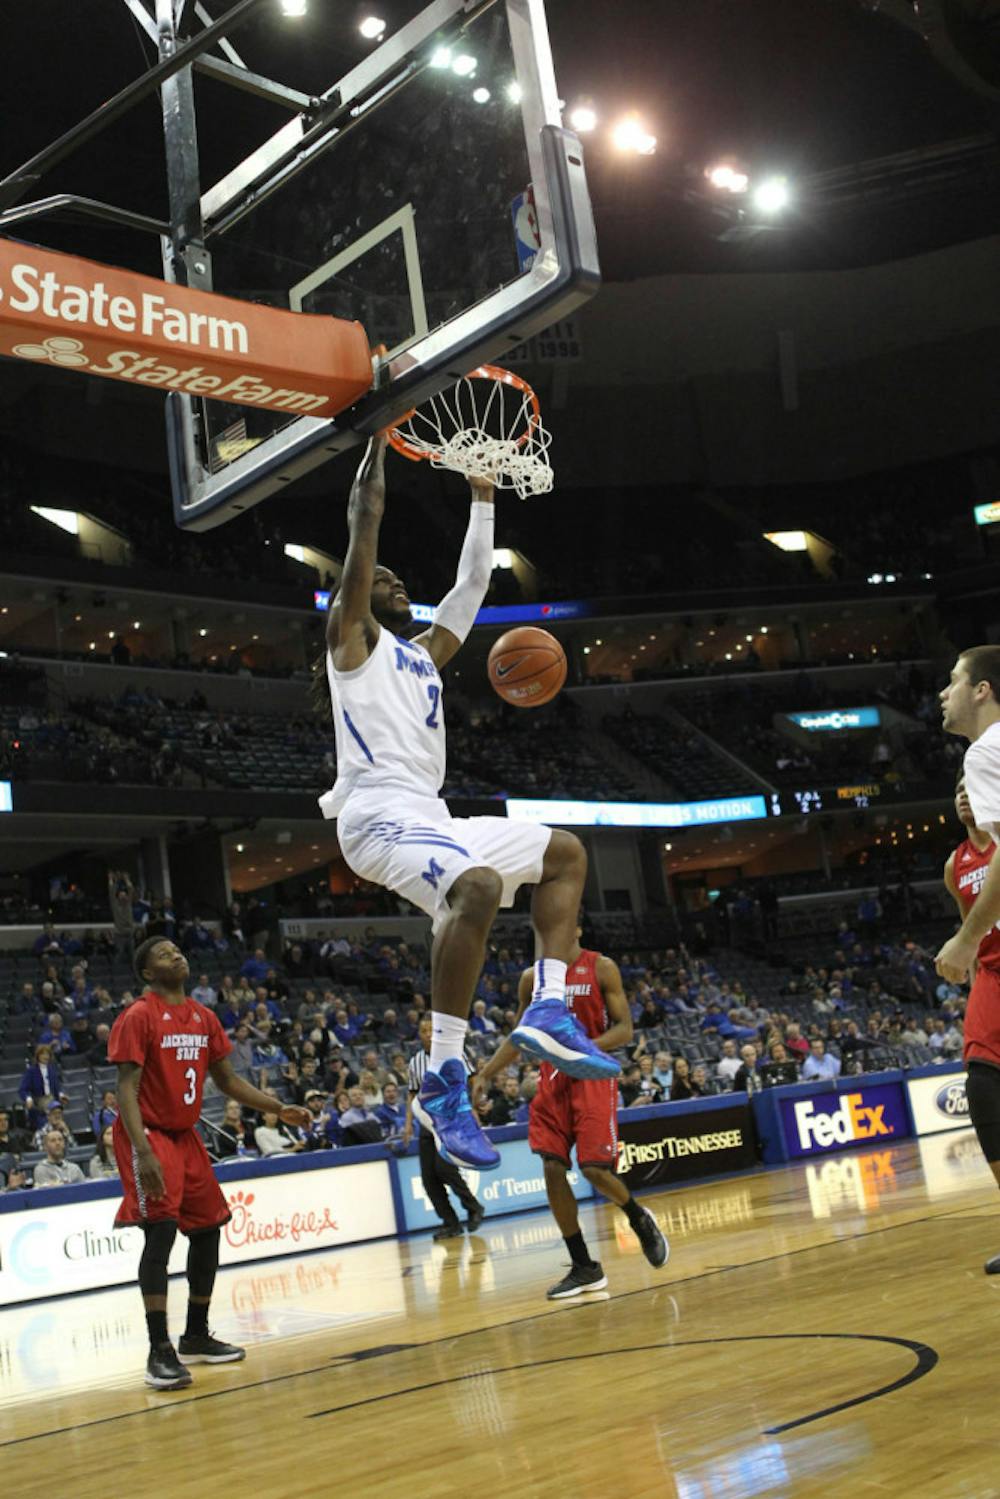 <p>University of Memphis forward Shaq Goodwin dunks the ball in a game against Jacksonville State in the 2014-15 season. Goodwin averaged 10.7 points per game in his four seasons at Memphis.&nbsp;</p>